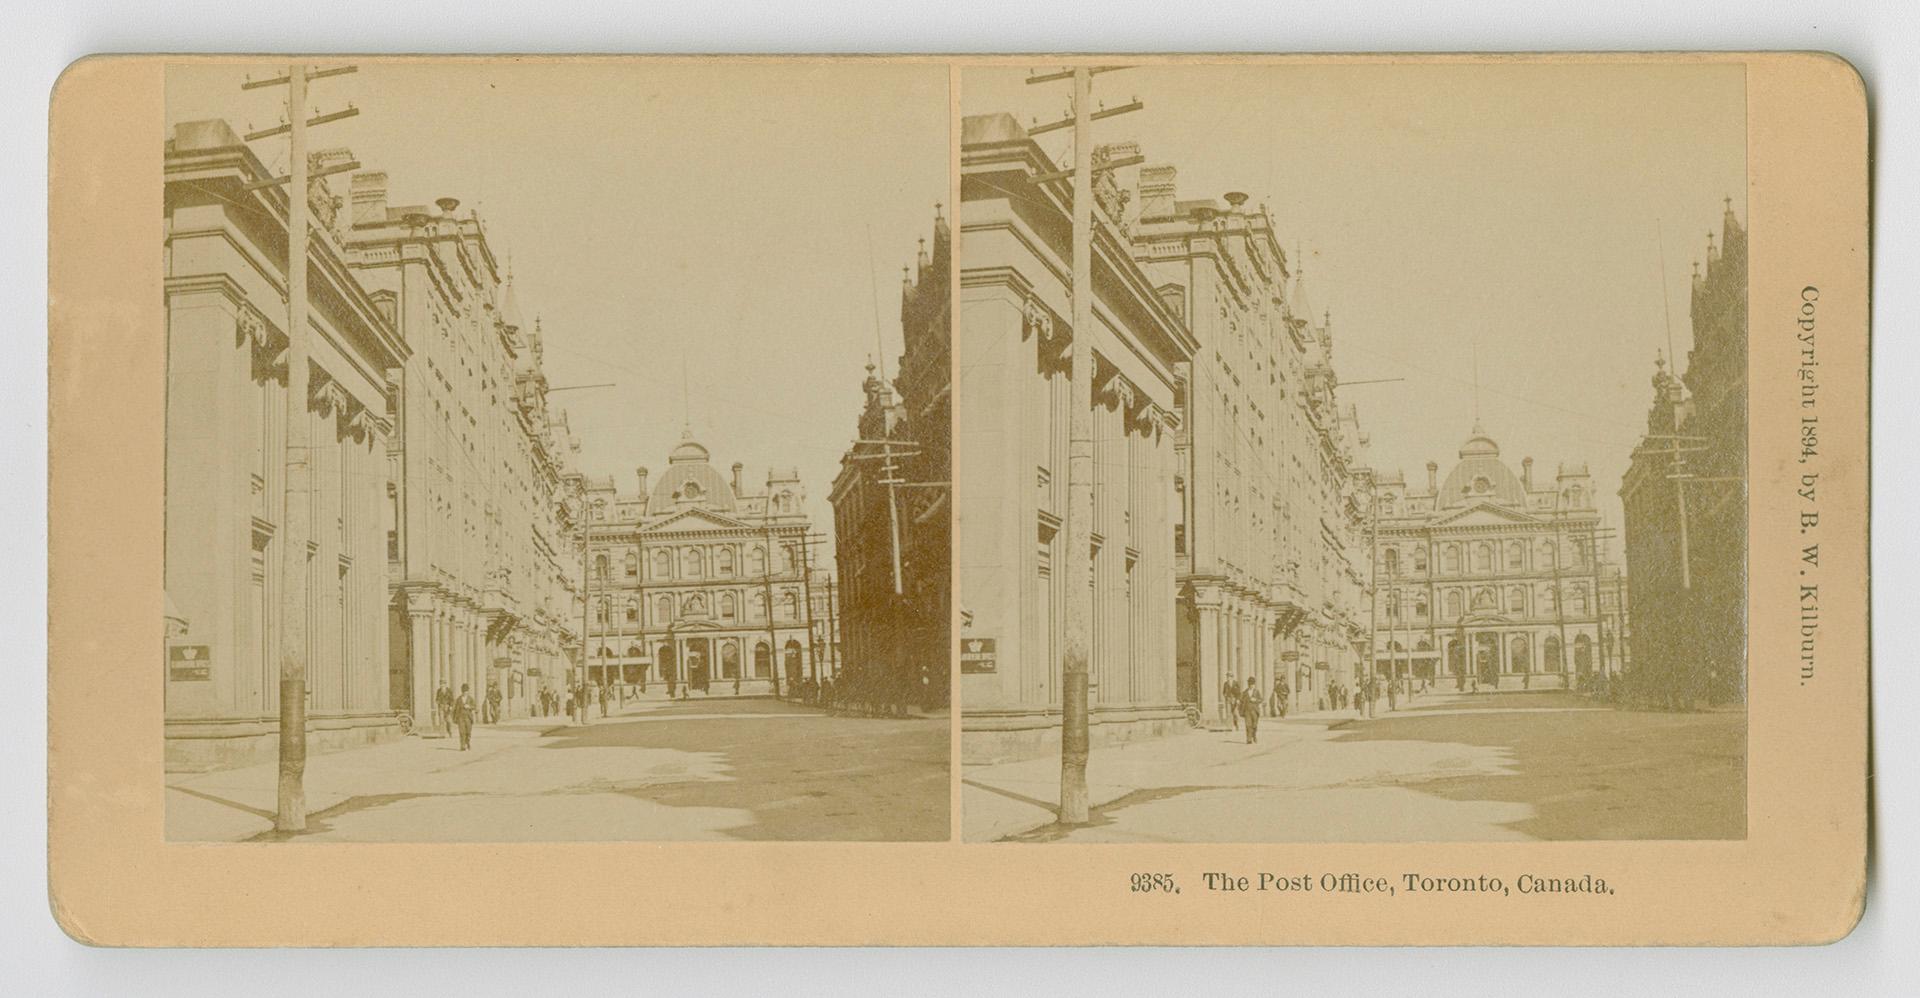 Pictures show a Victorian building with four stories at the top of a city street